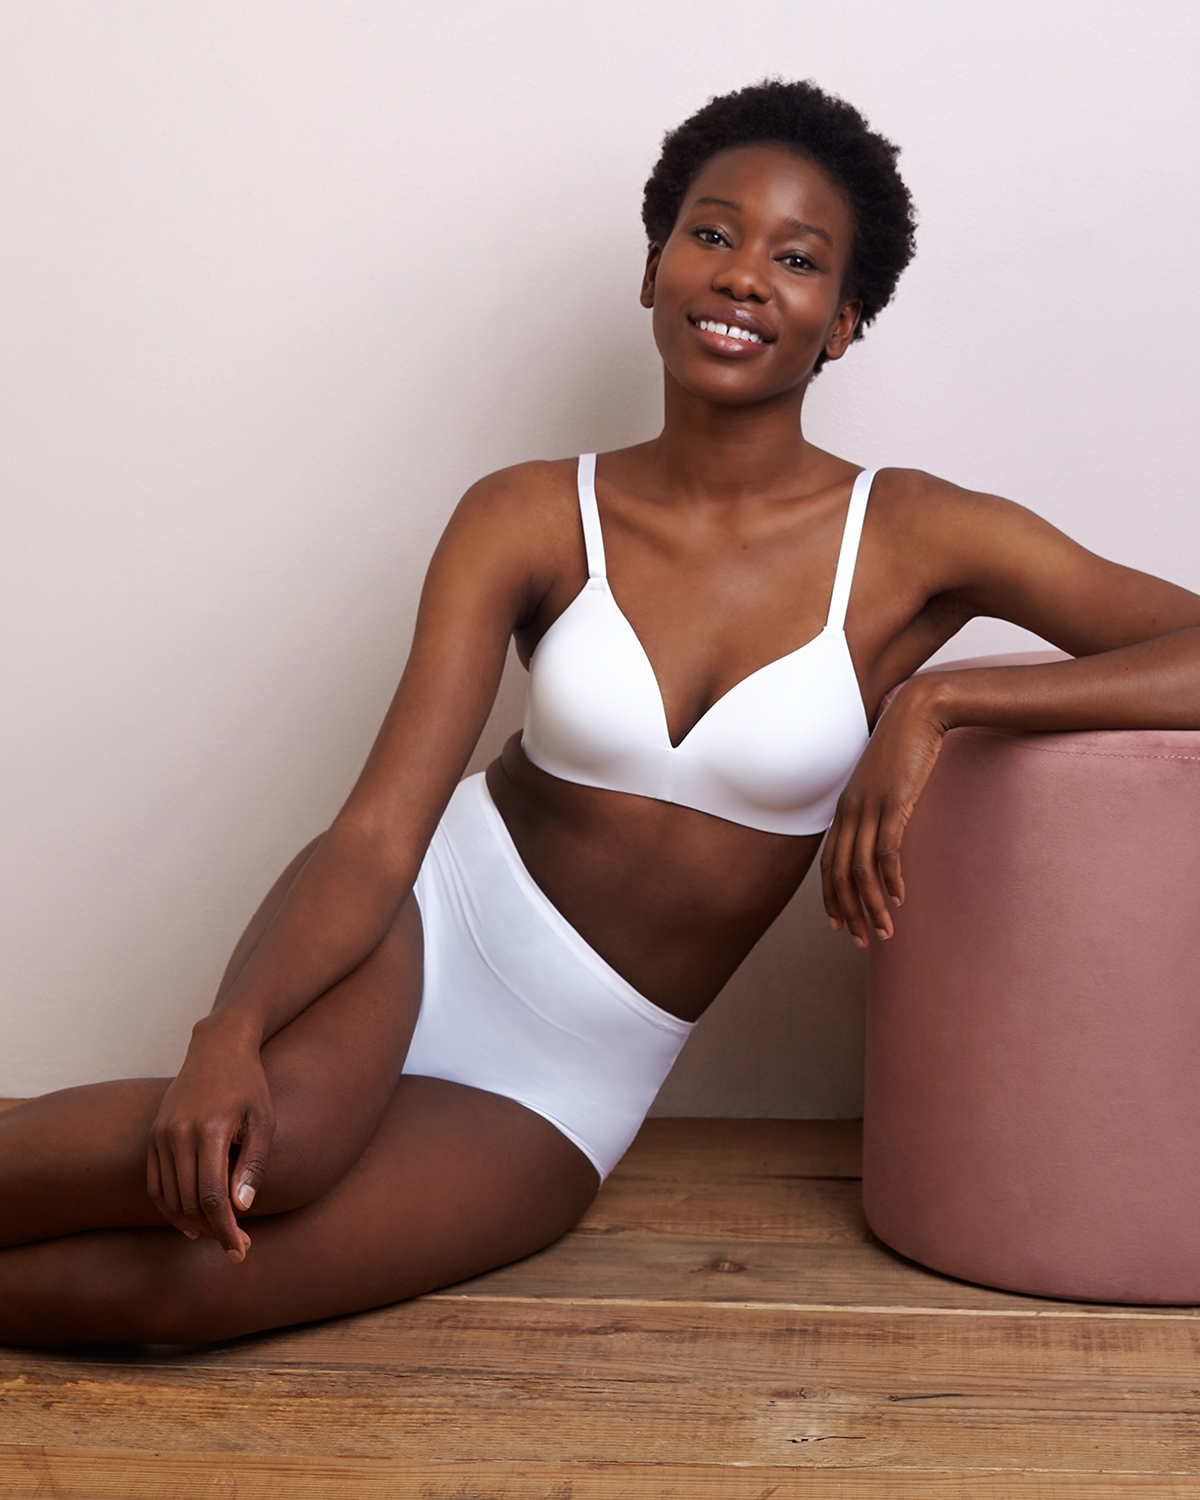 Dunnes Stores  White Smoothing Non-Wired T-Shirt Bra